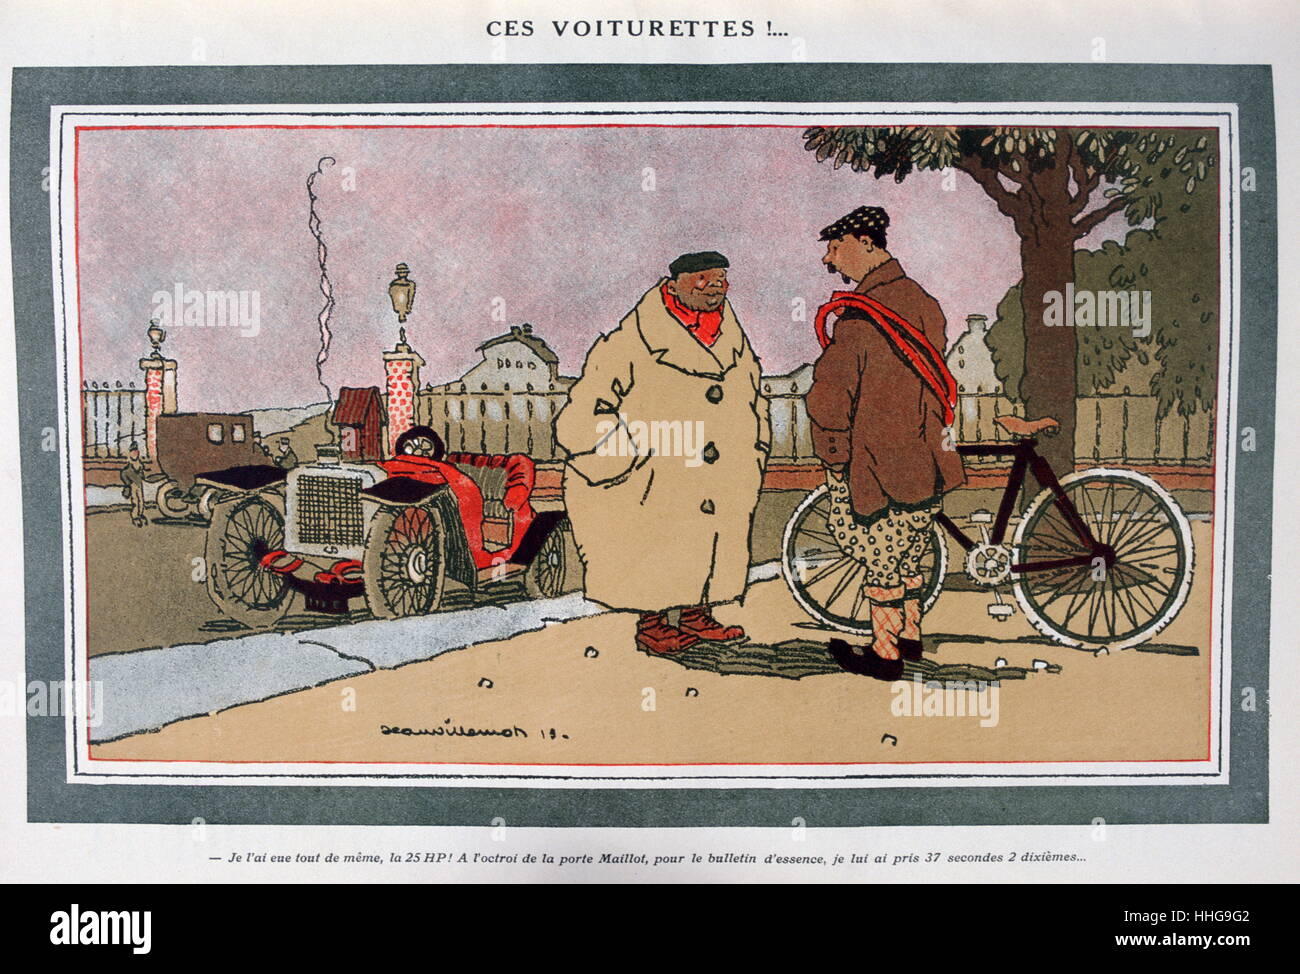 Ces voiturettes!', French motoring cartoon', 1913; by Jean Villemot, (1880 - 1958), French illustrator. The cartoon compares the speed of a bicycle with that of a motor car. Stock Photo